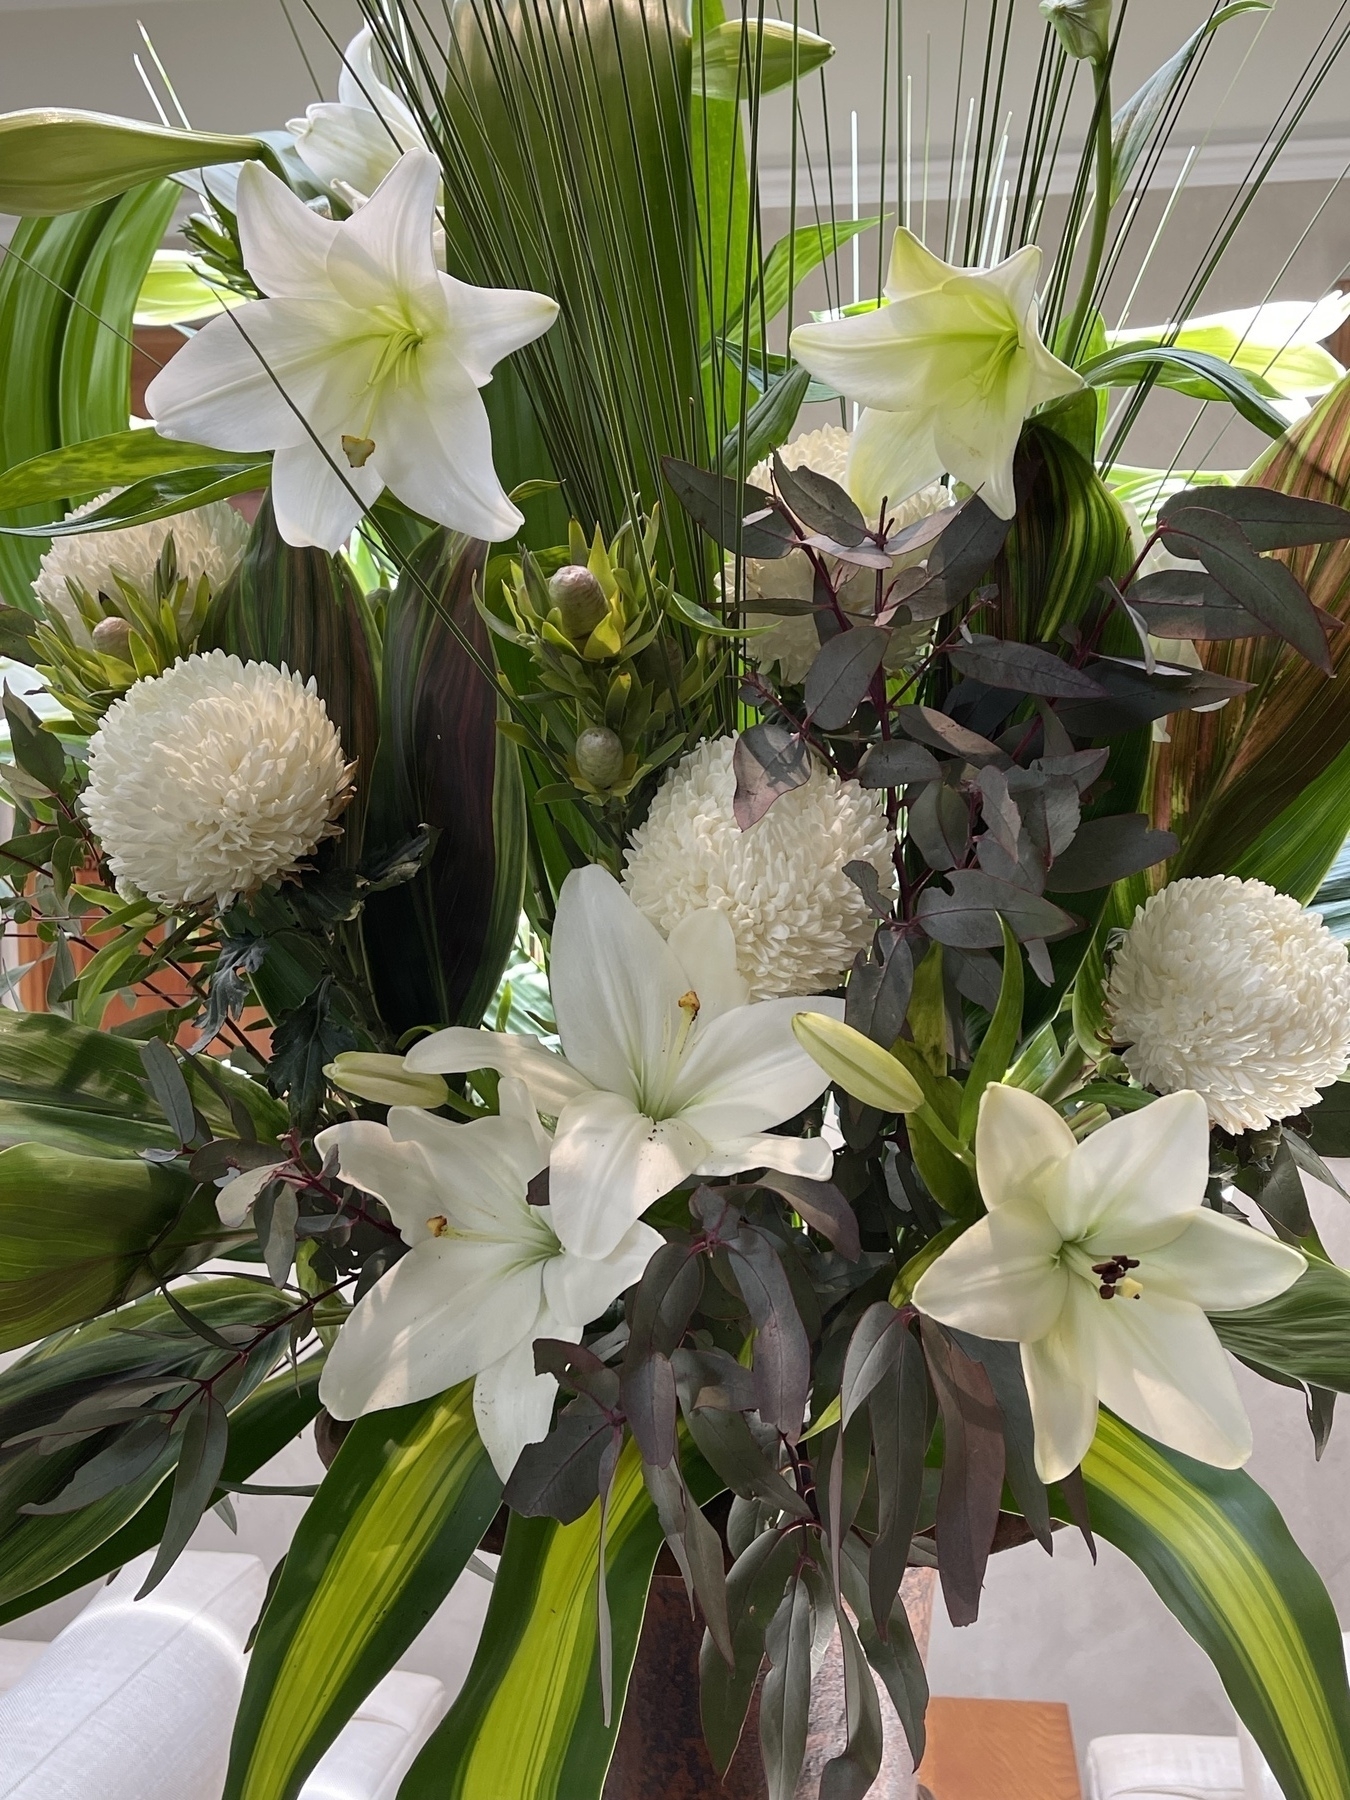 A large bouquet of white and green flowers.